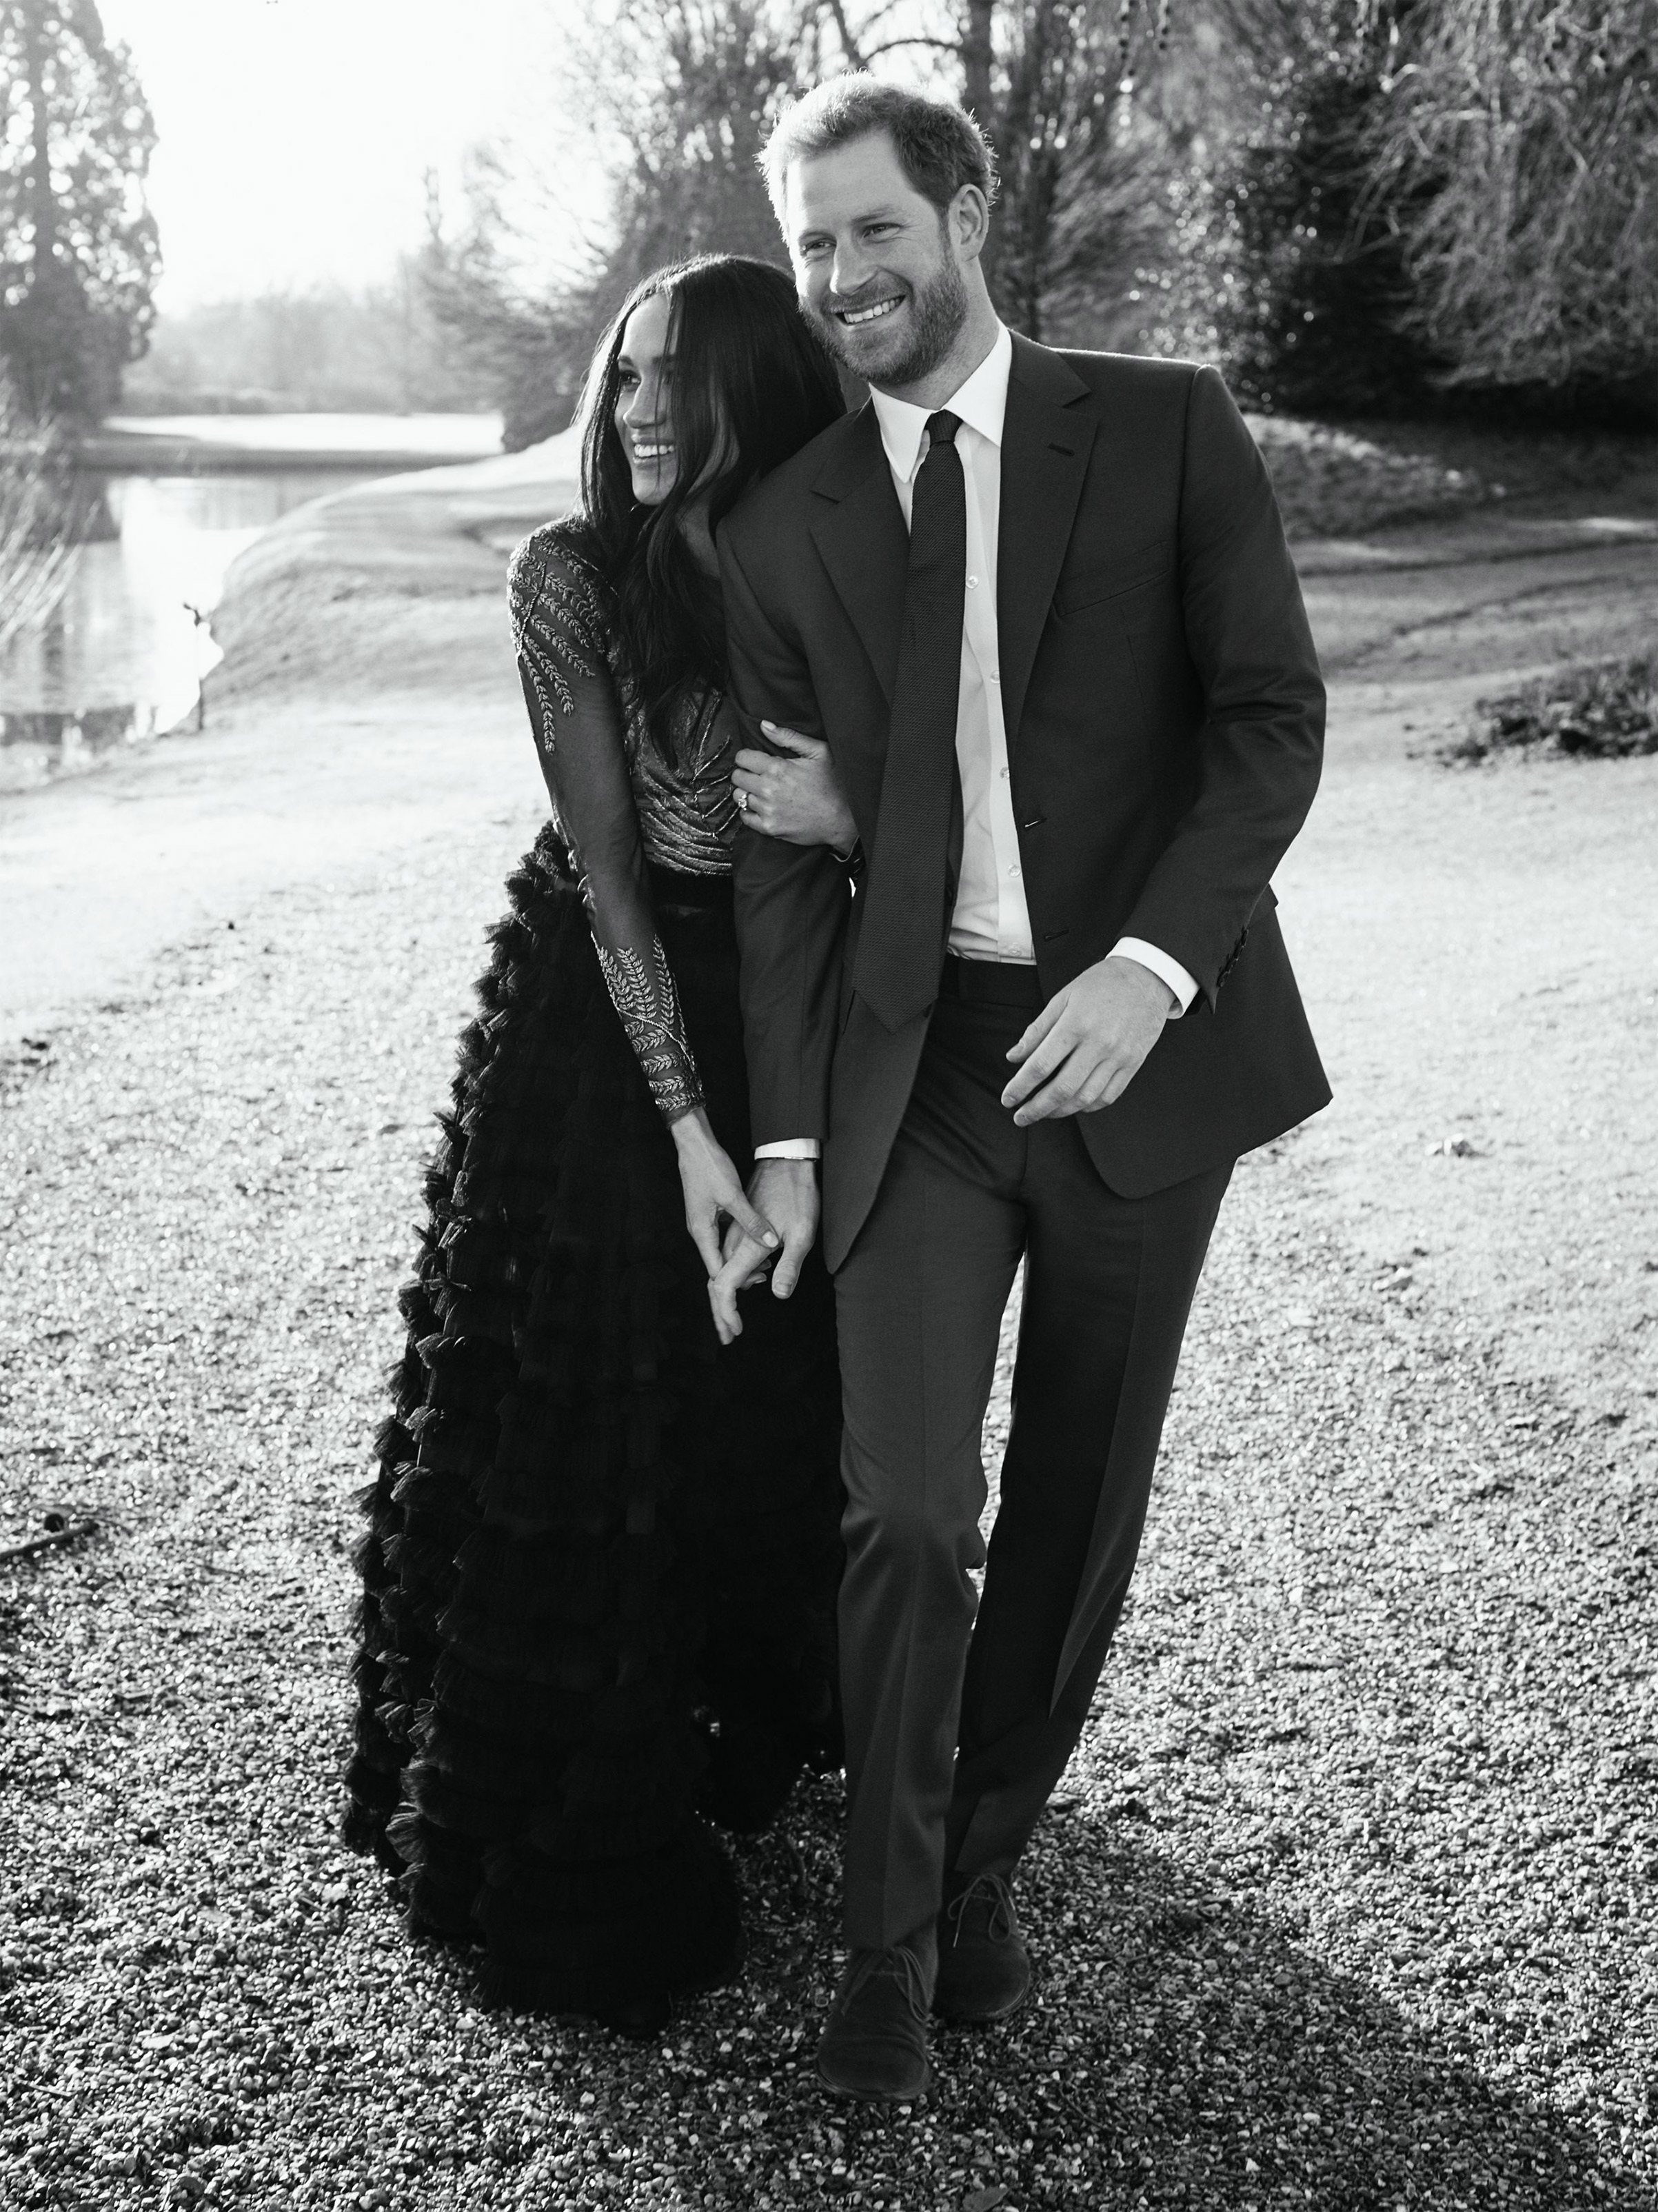 A third official engagement photo of Prince Harry and actor Meghan Markle taken at Frogmore Estate in Windsor, released by Kensington Palace on Dec. 21, 2017. (Alexi Lubomirski/REX—Shutterstock)